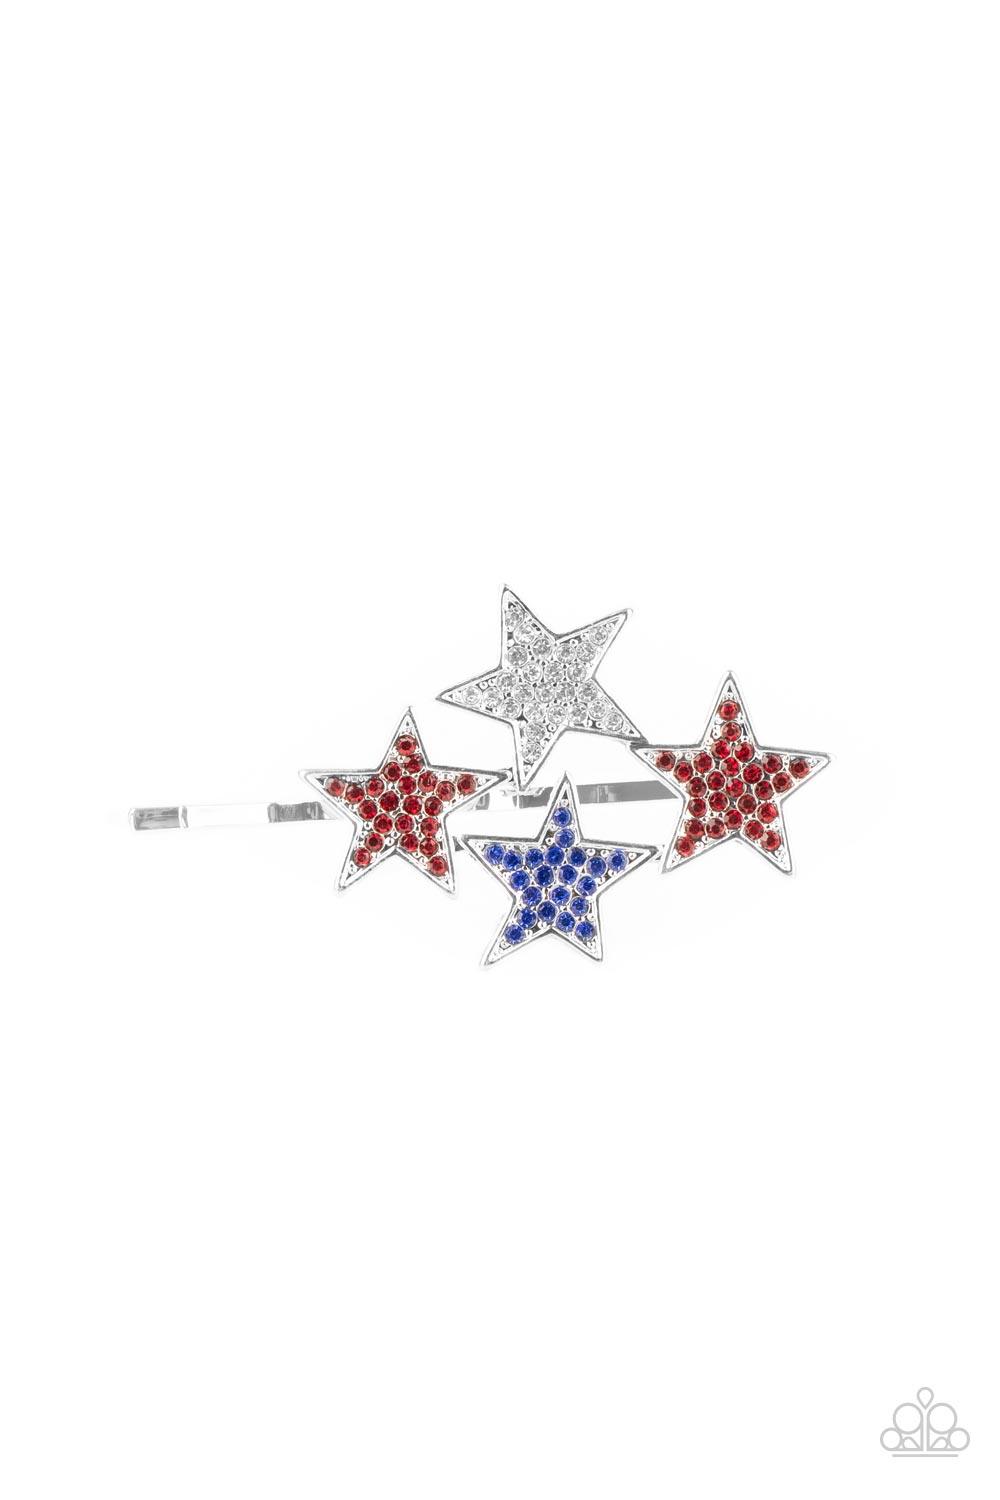 Paparazzi Accessories Stellar Celebration - Red Dotted in red, white, and blue rhinestones, an explosion of stars adorns the front of a silver bobby pin for a stellar patriotic shimmer. Sold as one individual decorative bobby pin. Jewelry